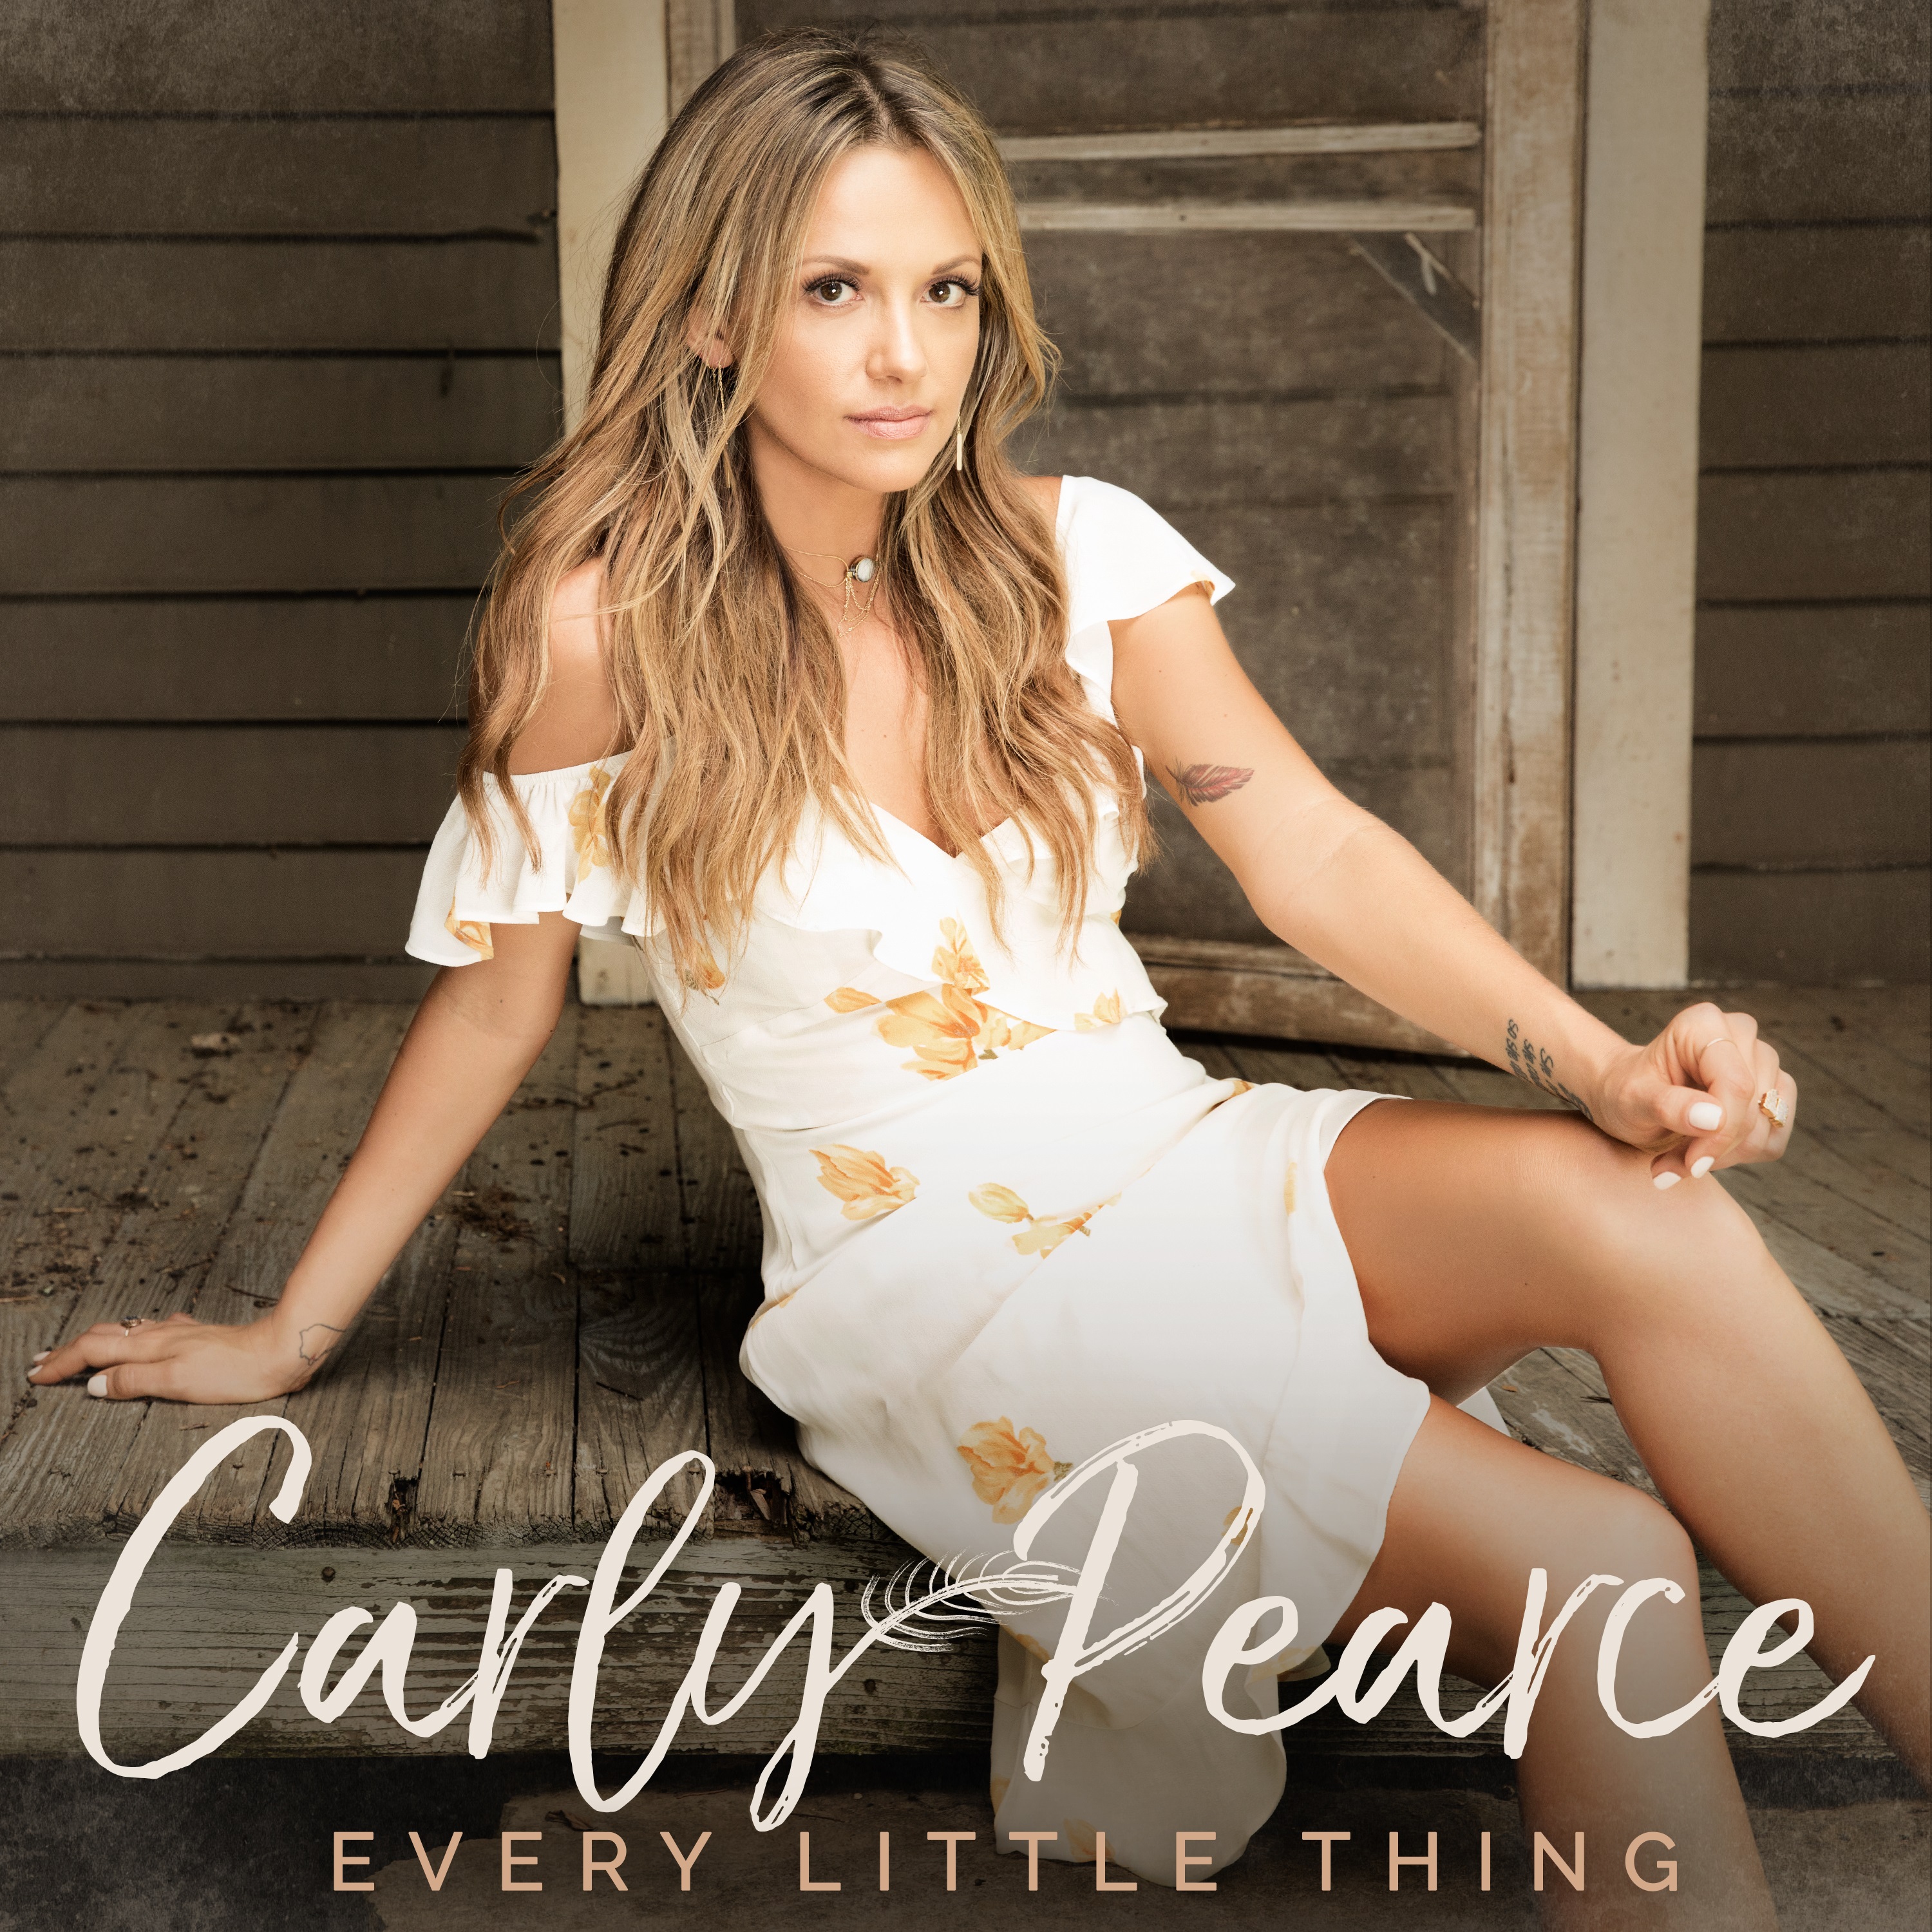 Carly Pearce; Cover Art Courtesy of Big Machine Records